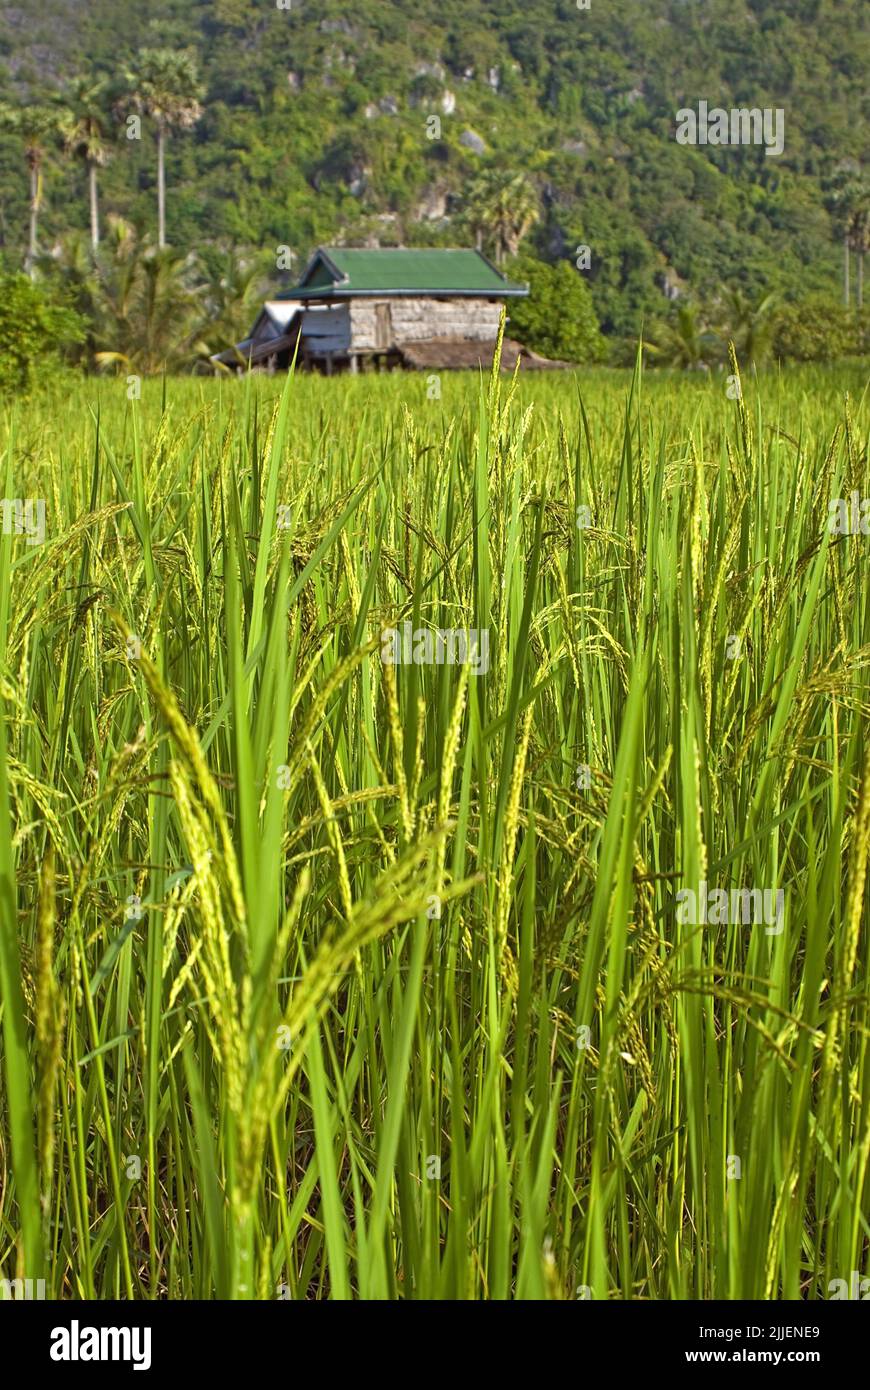 old wooden hut in the middle of a bright green rice field, Cambodia Stock Photo